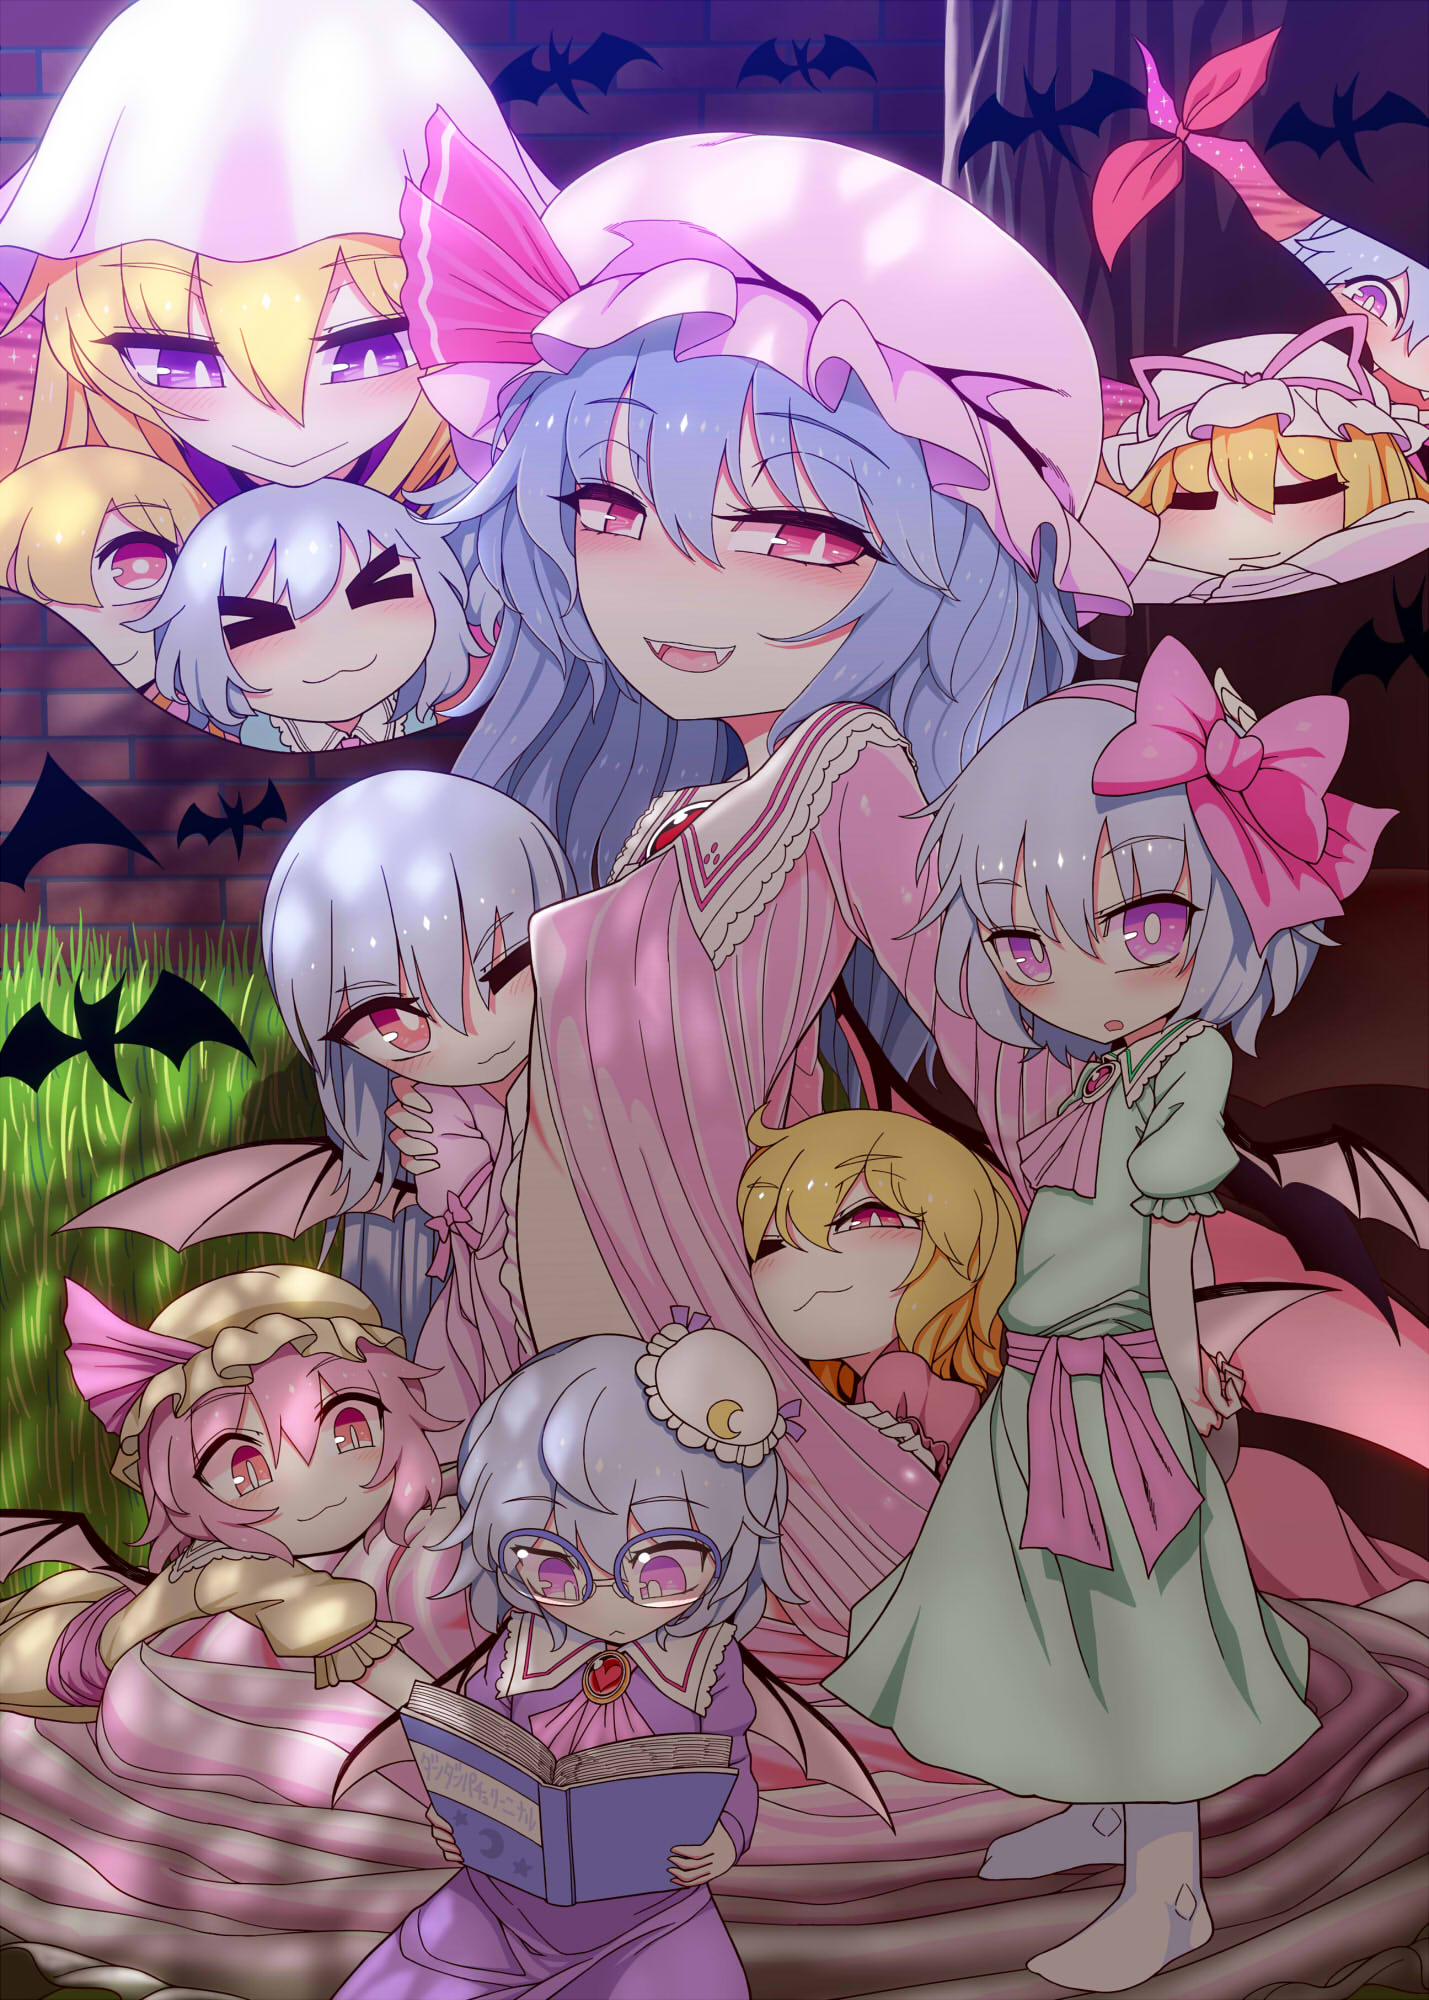 6+girls bat_wings blonde_hair blue_hair book bow commentary_request dress gap_(touhou) glasses hair_bow hat hat_ribbon highres if_they_mated long_hair long_sleeves looking_at_viewer mob_cap multiple_girls open_mouth pink_hair reading red_eyes remilia_scarlet ribbon short_hair smile touhou violet_eyes wings yakumo_yukari yassy